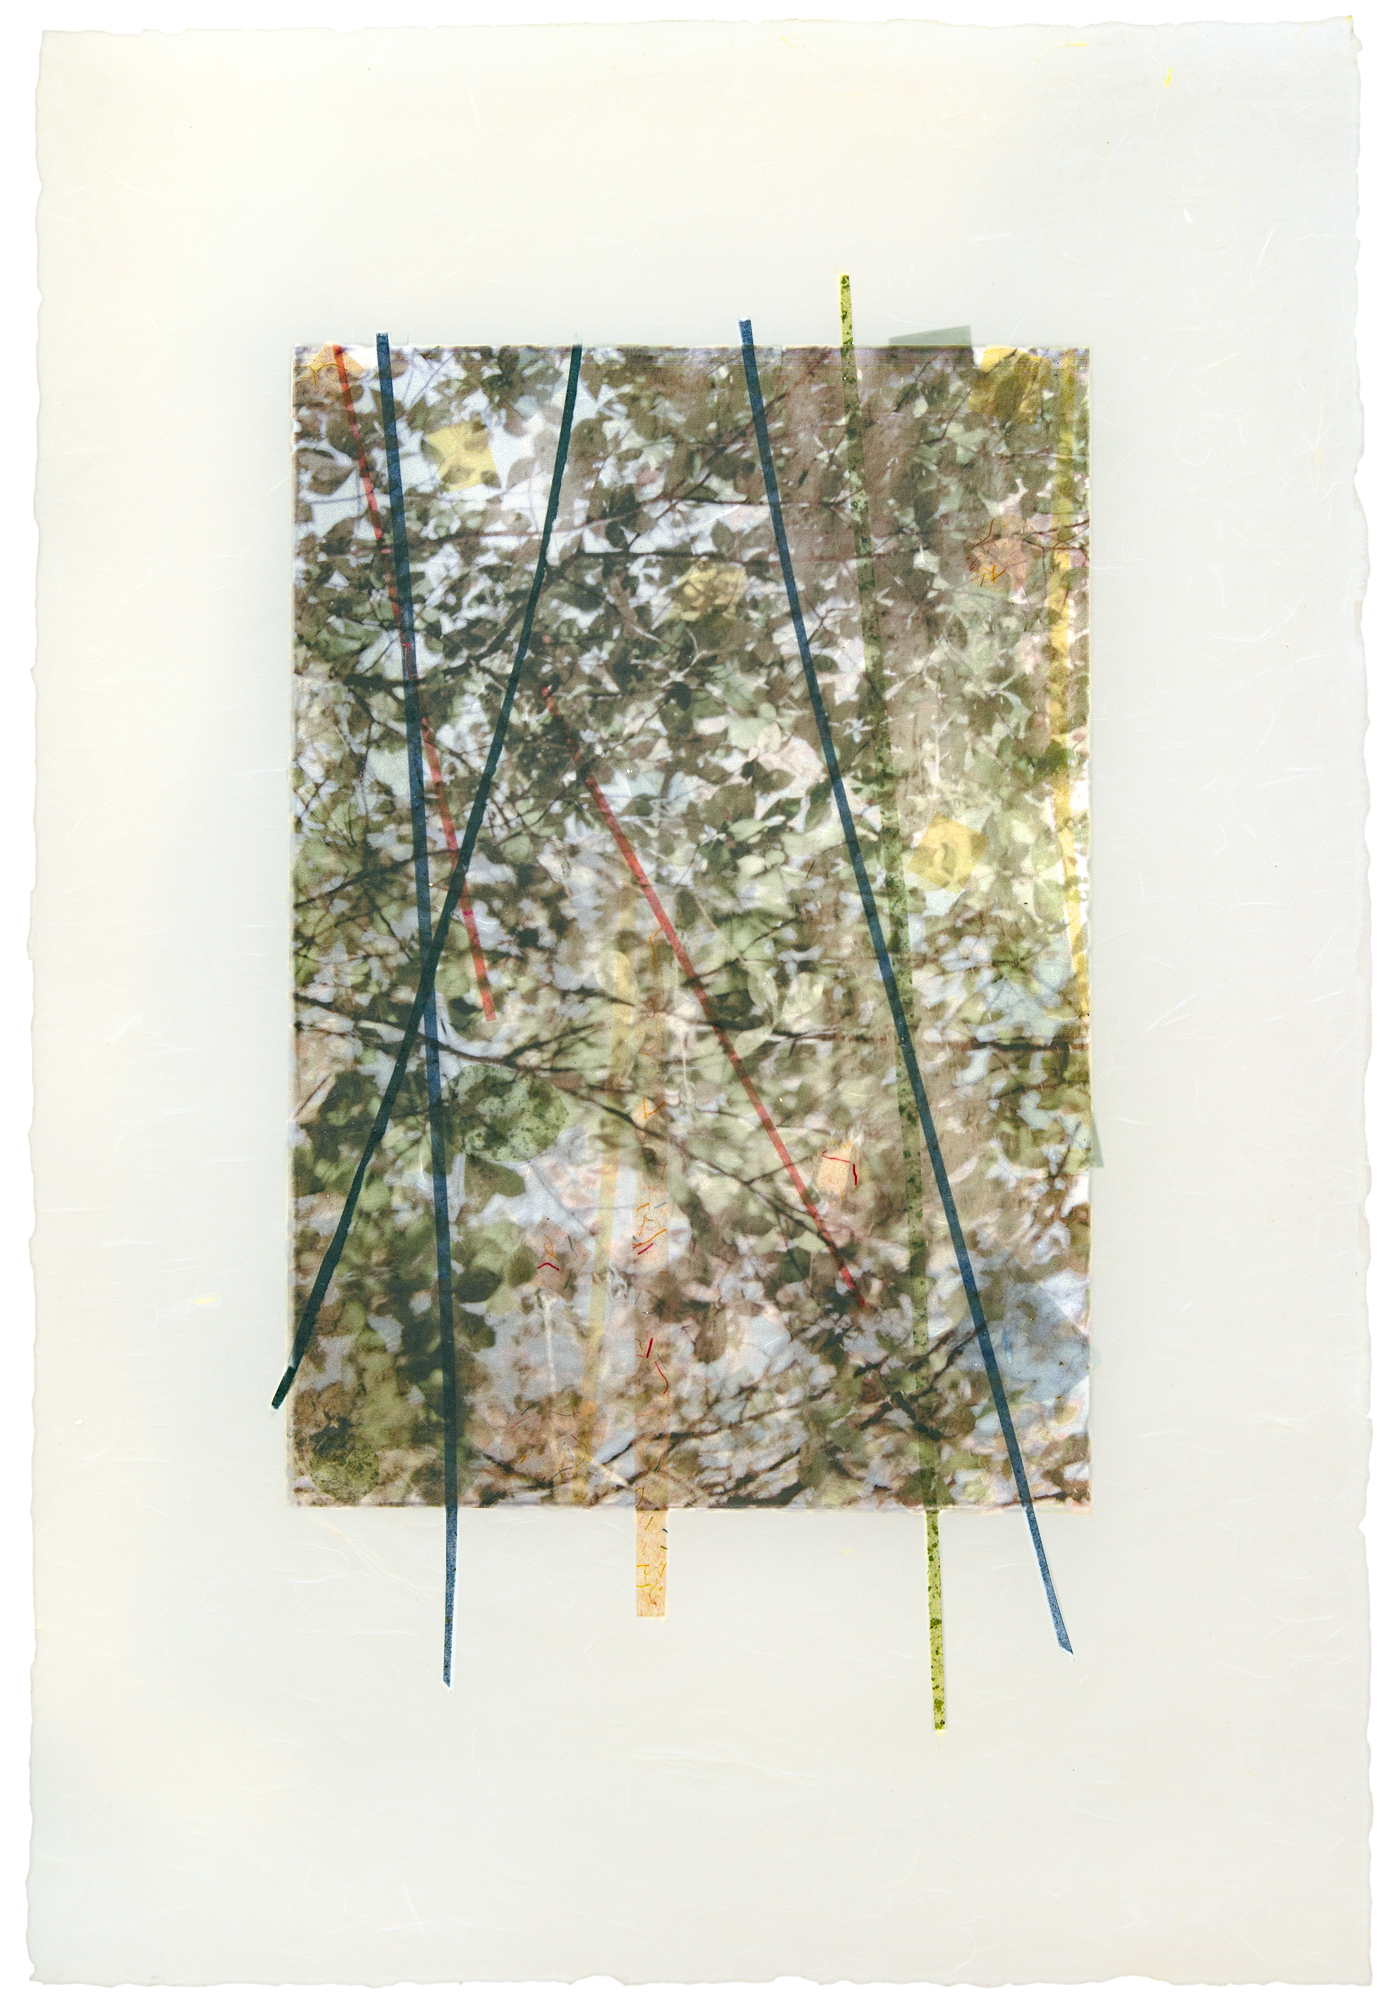   Light Streams , Long Island, NY, 2014  Ink jet print on Japanese rice paper, rice papers, wax  28” x 20” 